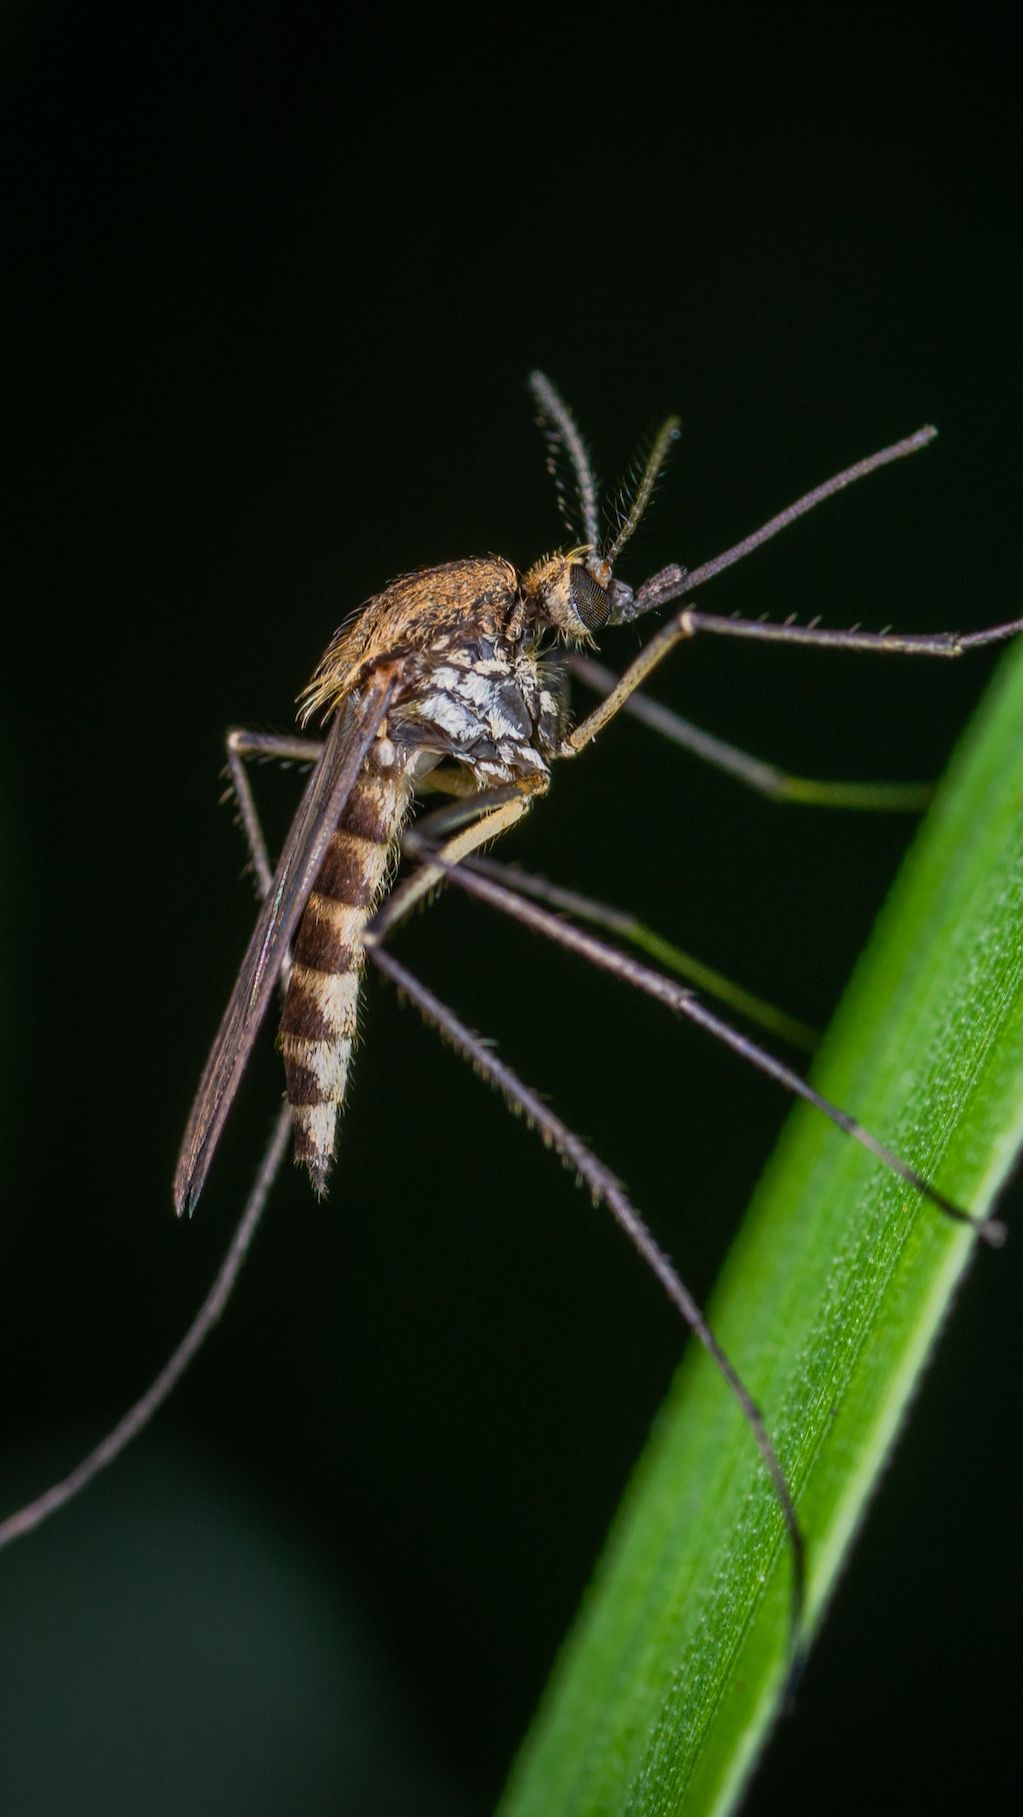 6. Mosquitoes: Hidden Animals of Life's Essence <div><br></div><div>Mosquitoes may not drink blood in the same manner as vampire lore. But they are known for their power to secretly suck the blood of humans and animals secretly. Their sharp mouth (proboscis) and the way they leave behind an itchy. The swelling bite has earned them a reputation that echoes the markers of vampires.</div><div><br></div><div>Photo: pexels-egor-kamelev</div>